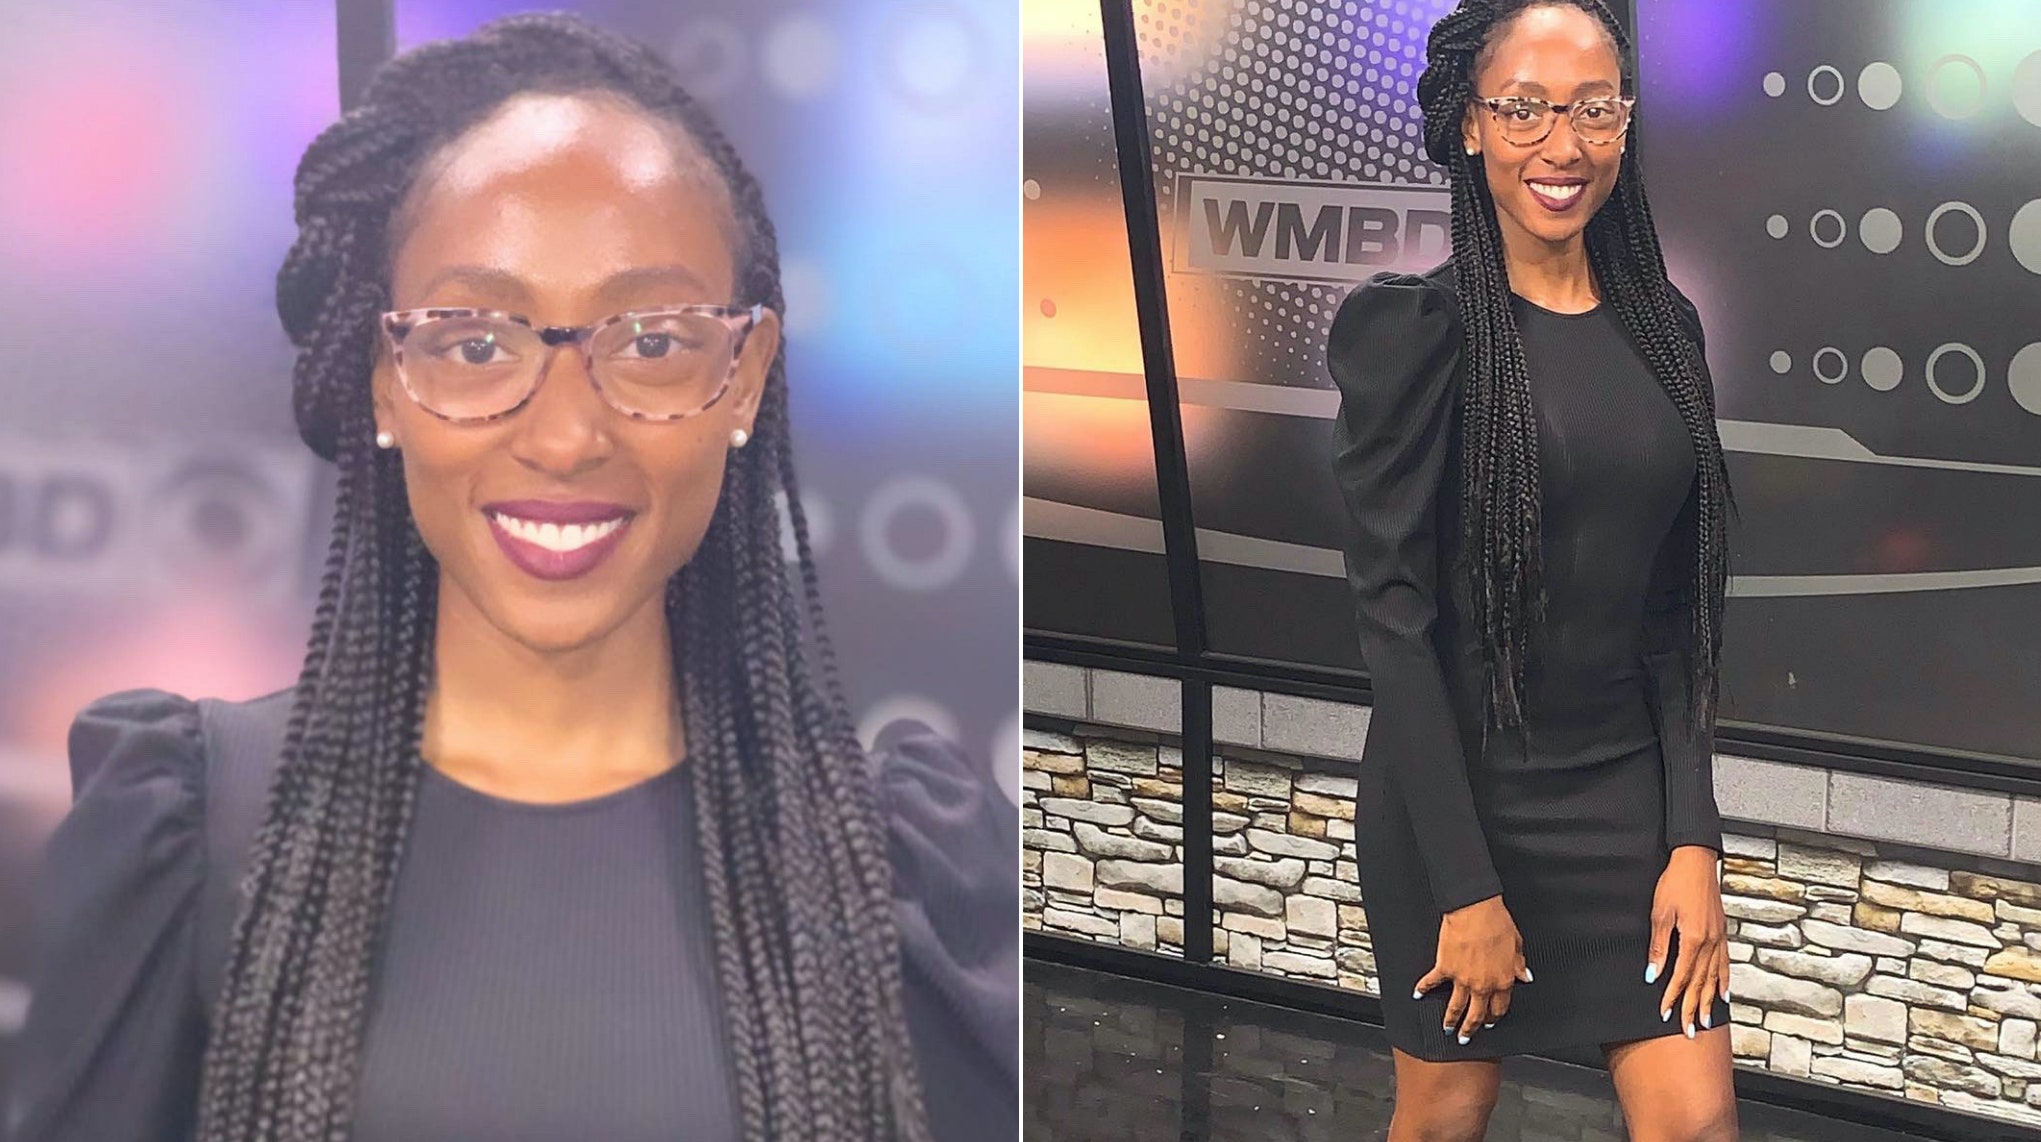 TV Reporter Reminds Everyone That Braids Are Professional in Viral Tweet